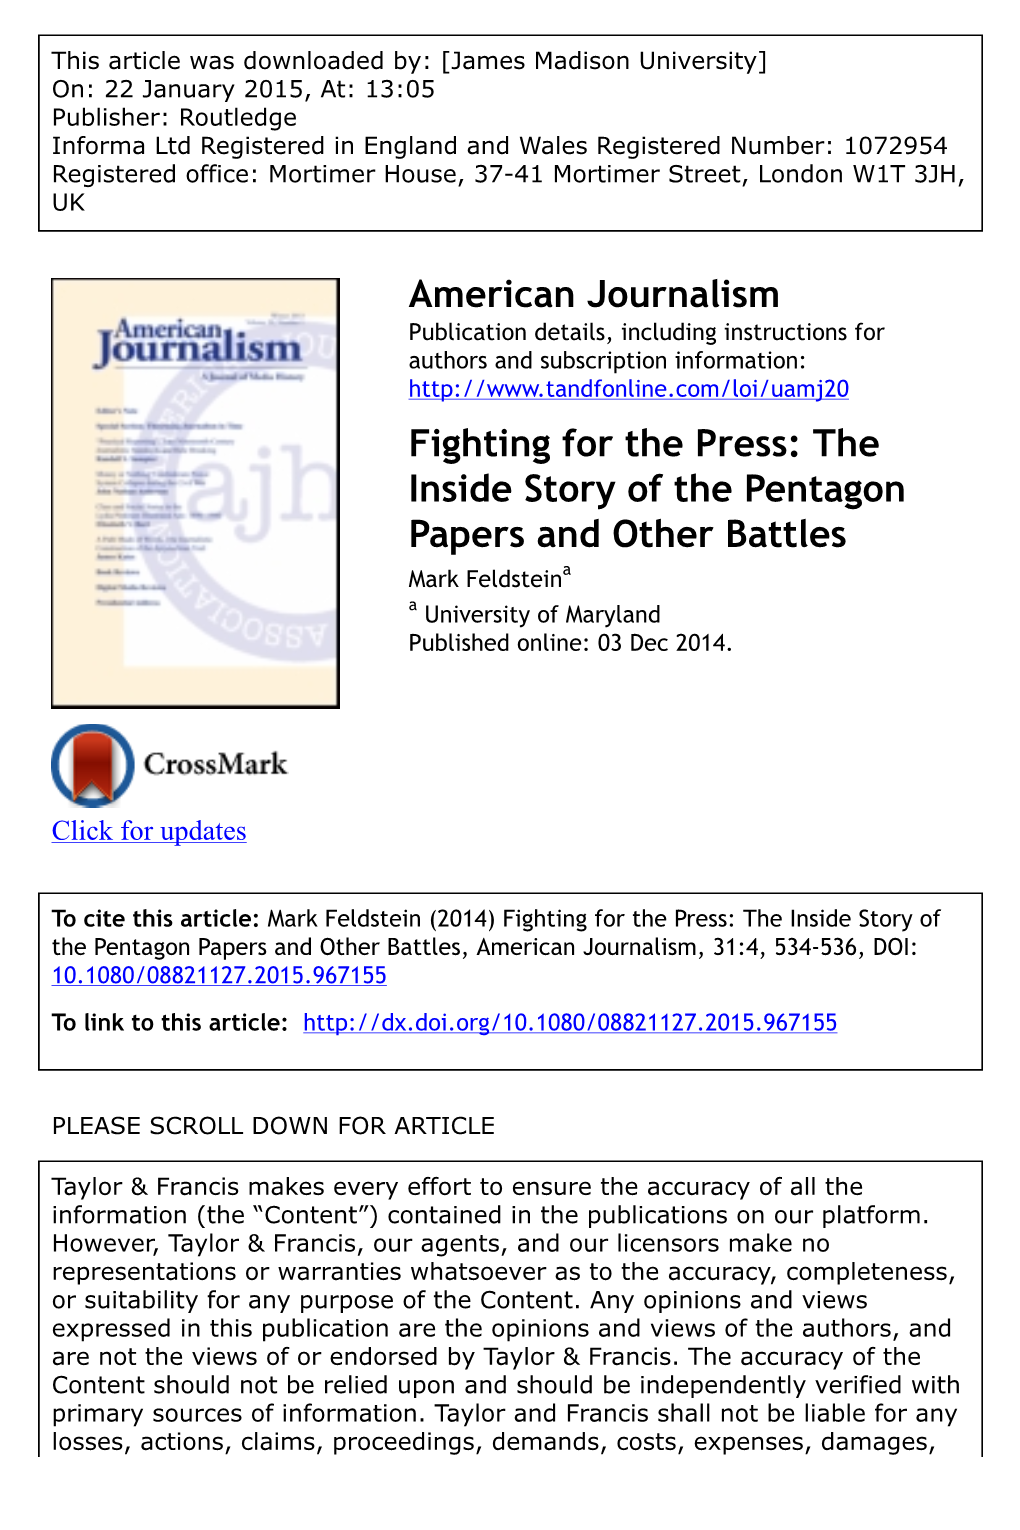 American Journalism Fighting for the Press: the Inside Story of The